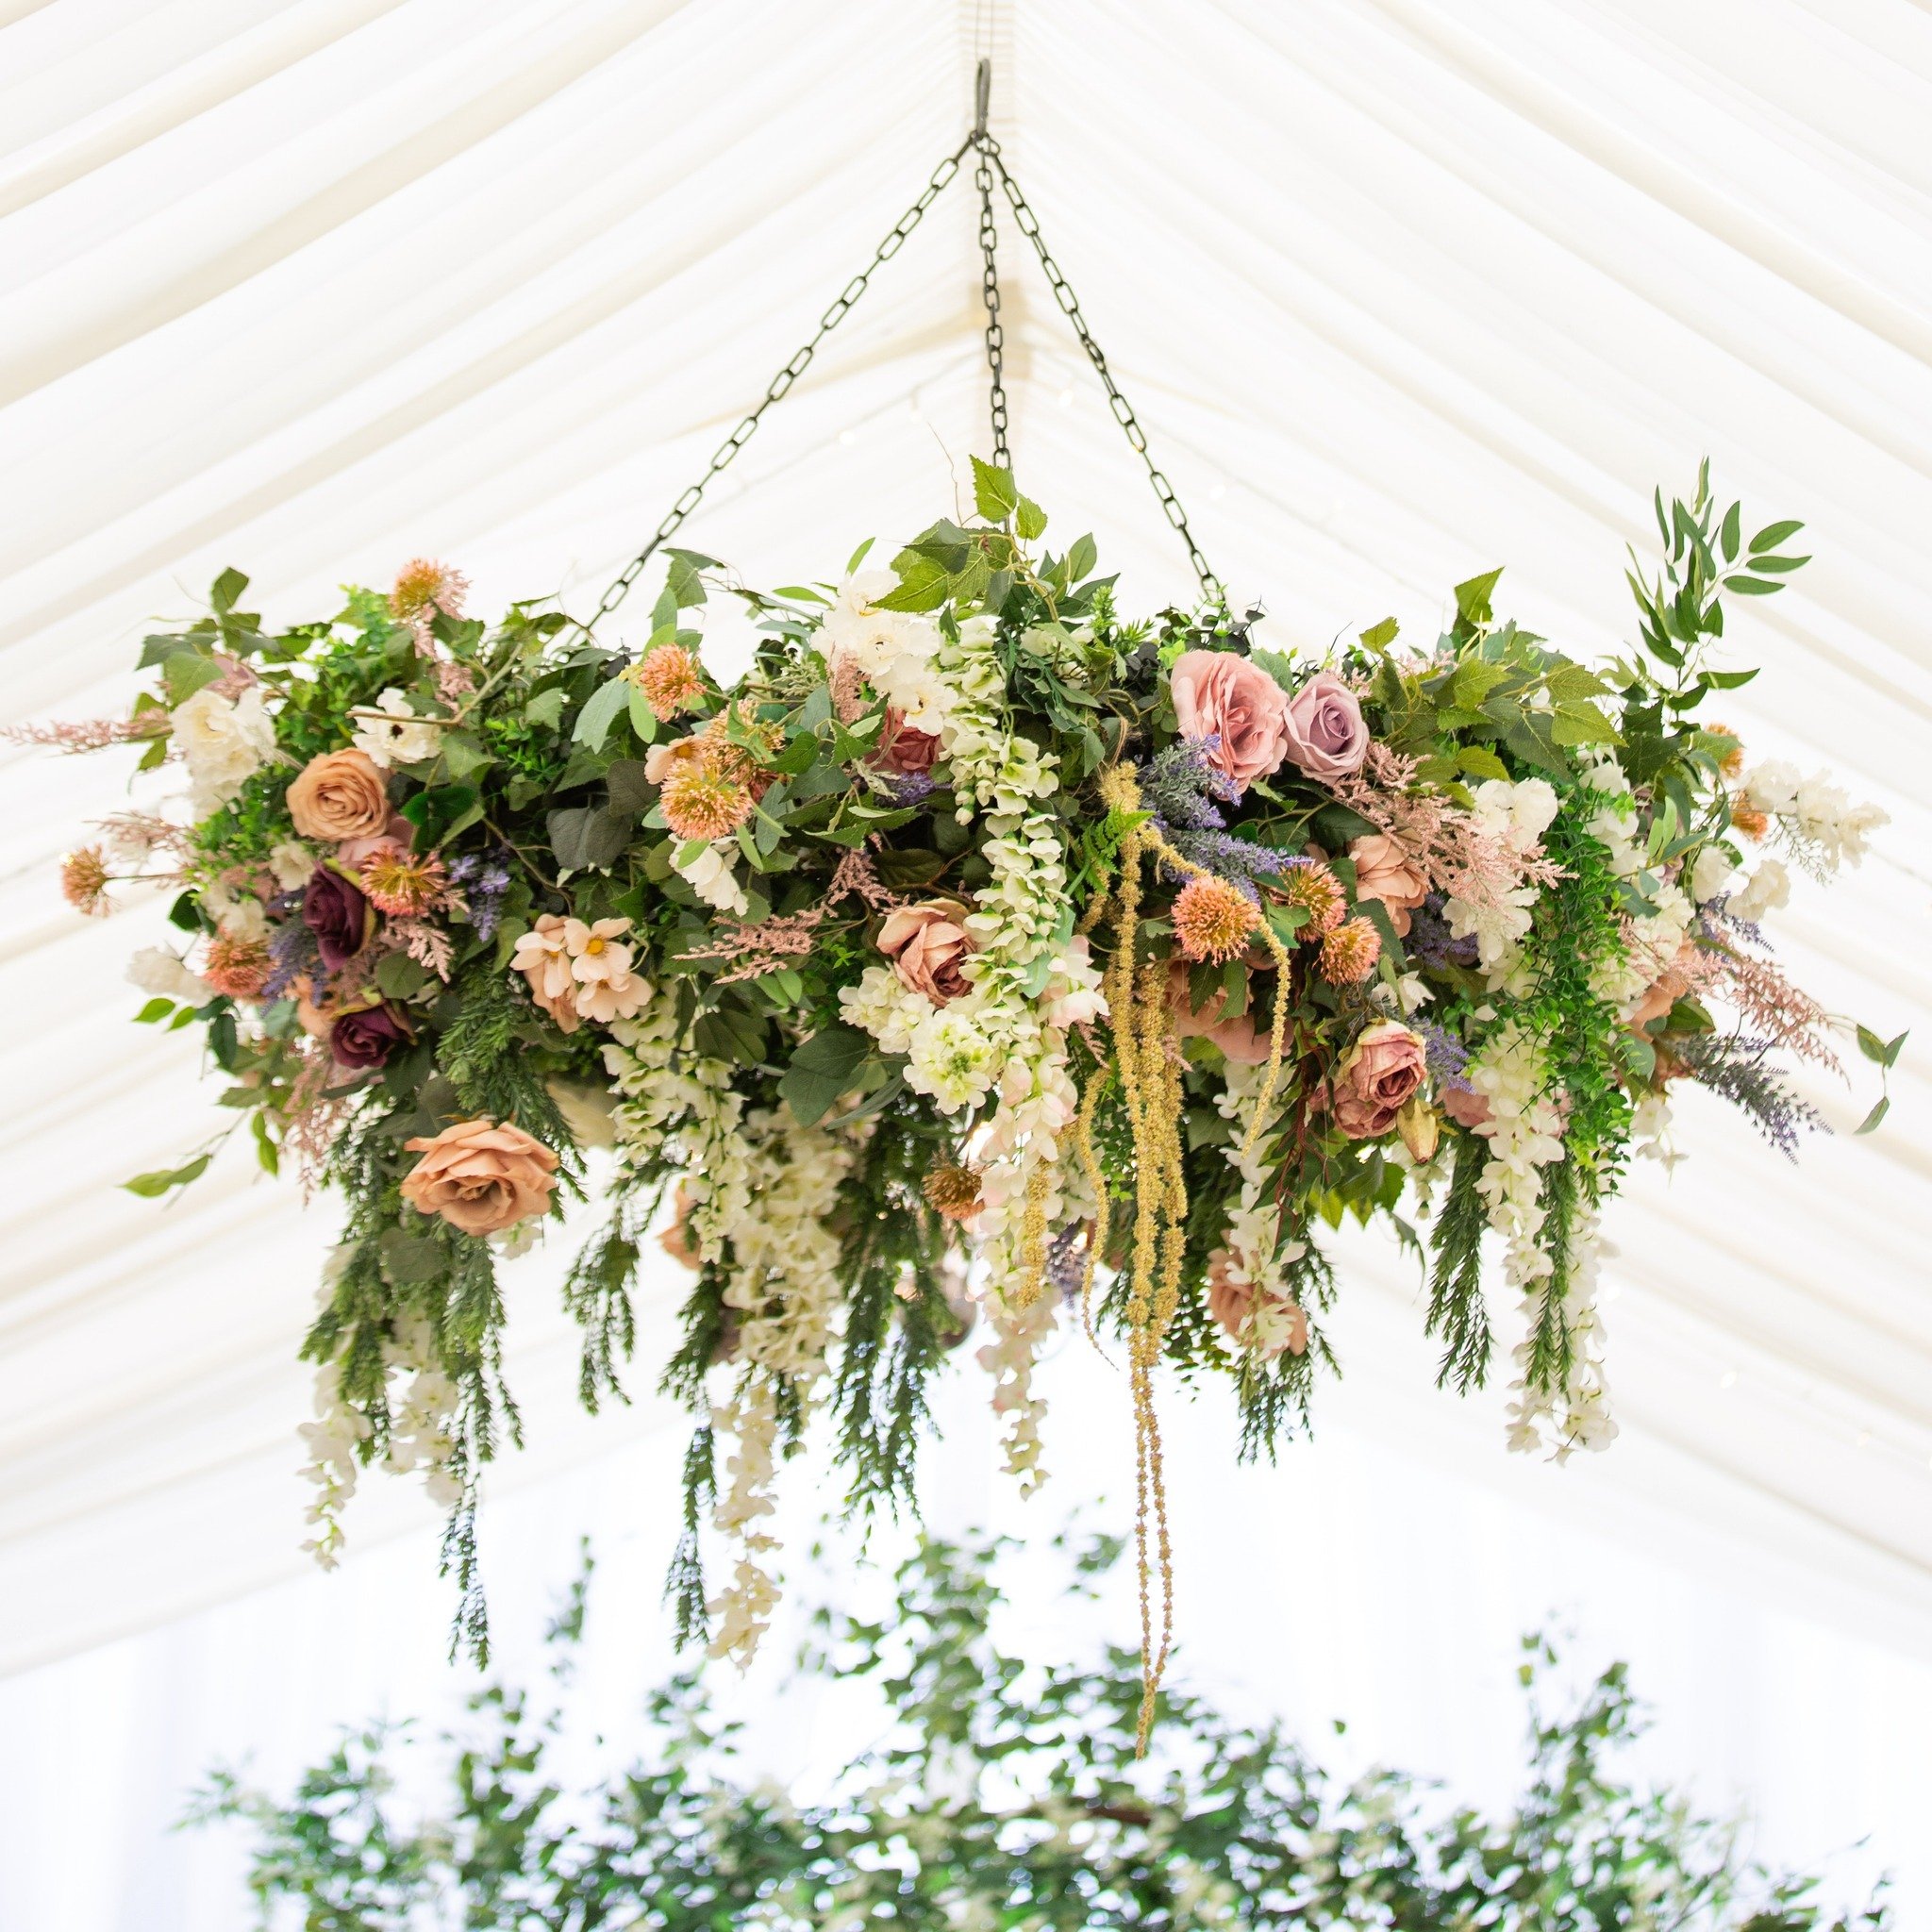 Just one example of our popular faux floral chandeliers 💕🌿 

Photographed on our styled shoot by @jo_sweeney_photography 

Venue: @burningfold

Photographer: @jo_sweeney_photography

Florist: @budandflower_
Dresses: @thebrideshop54
Models @jongreen